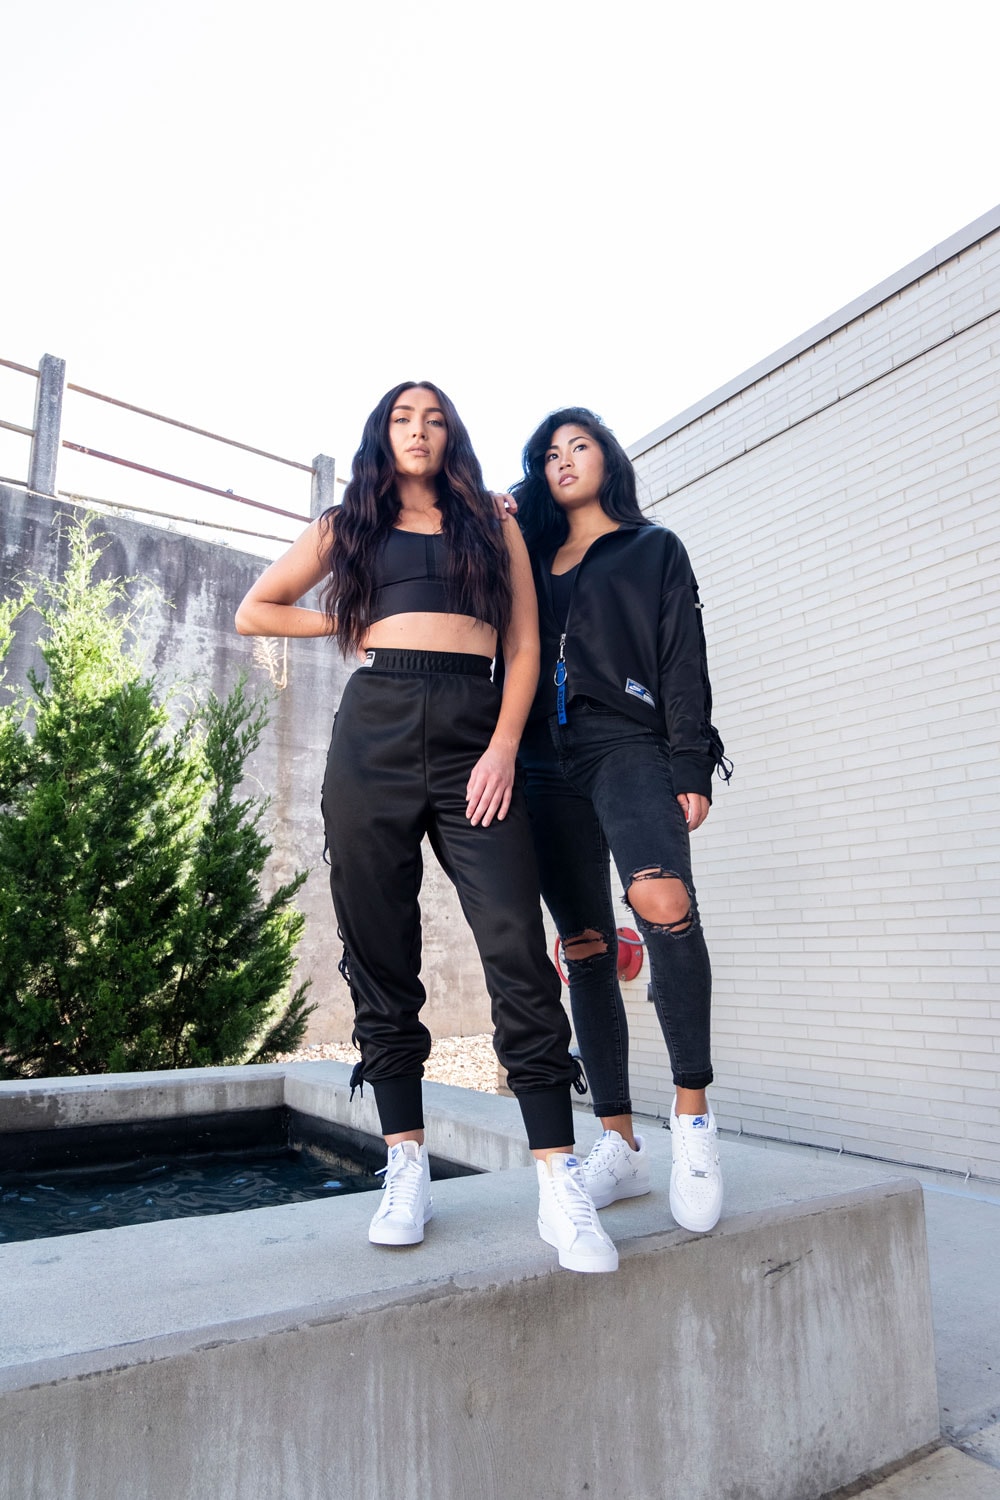 hibbett releases new women's seasonal collection with nike